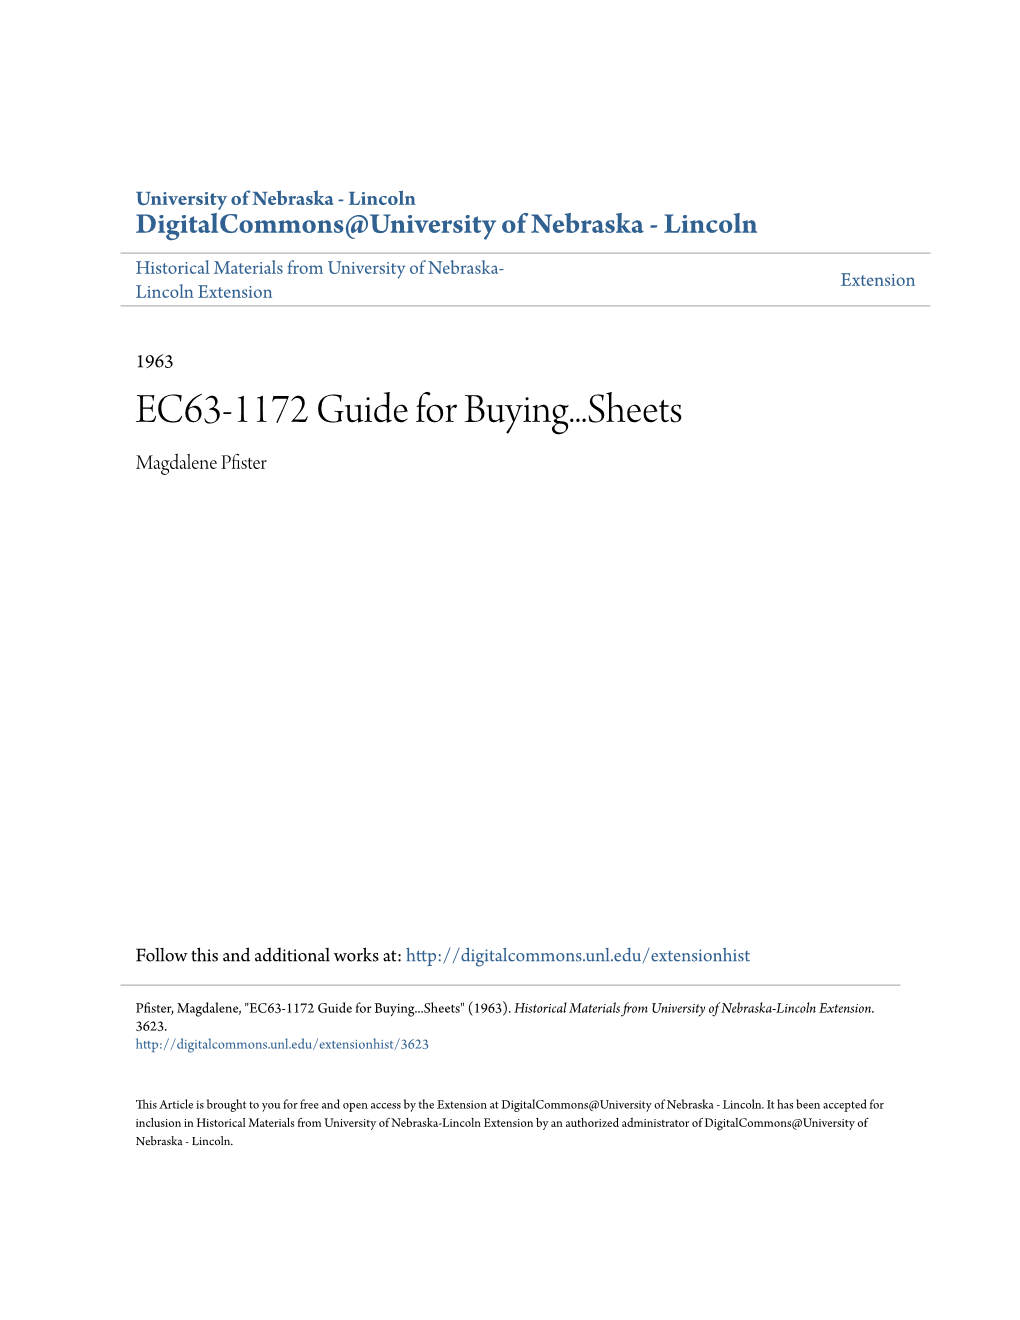 EC63-1172 Guide for Buying... Sheets